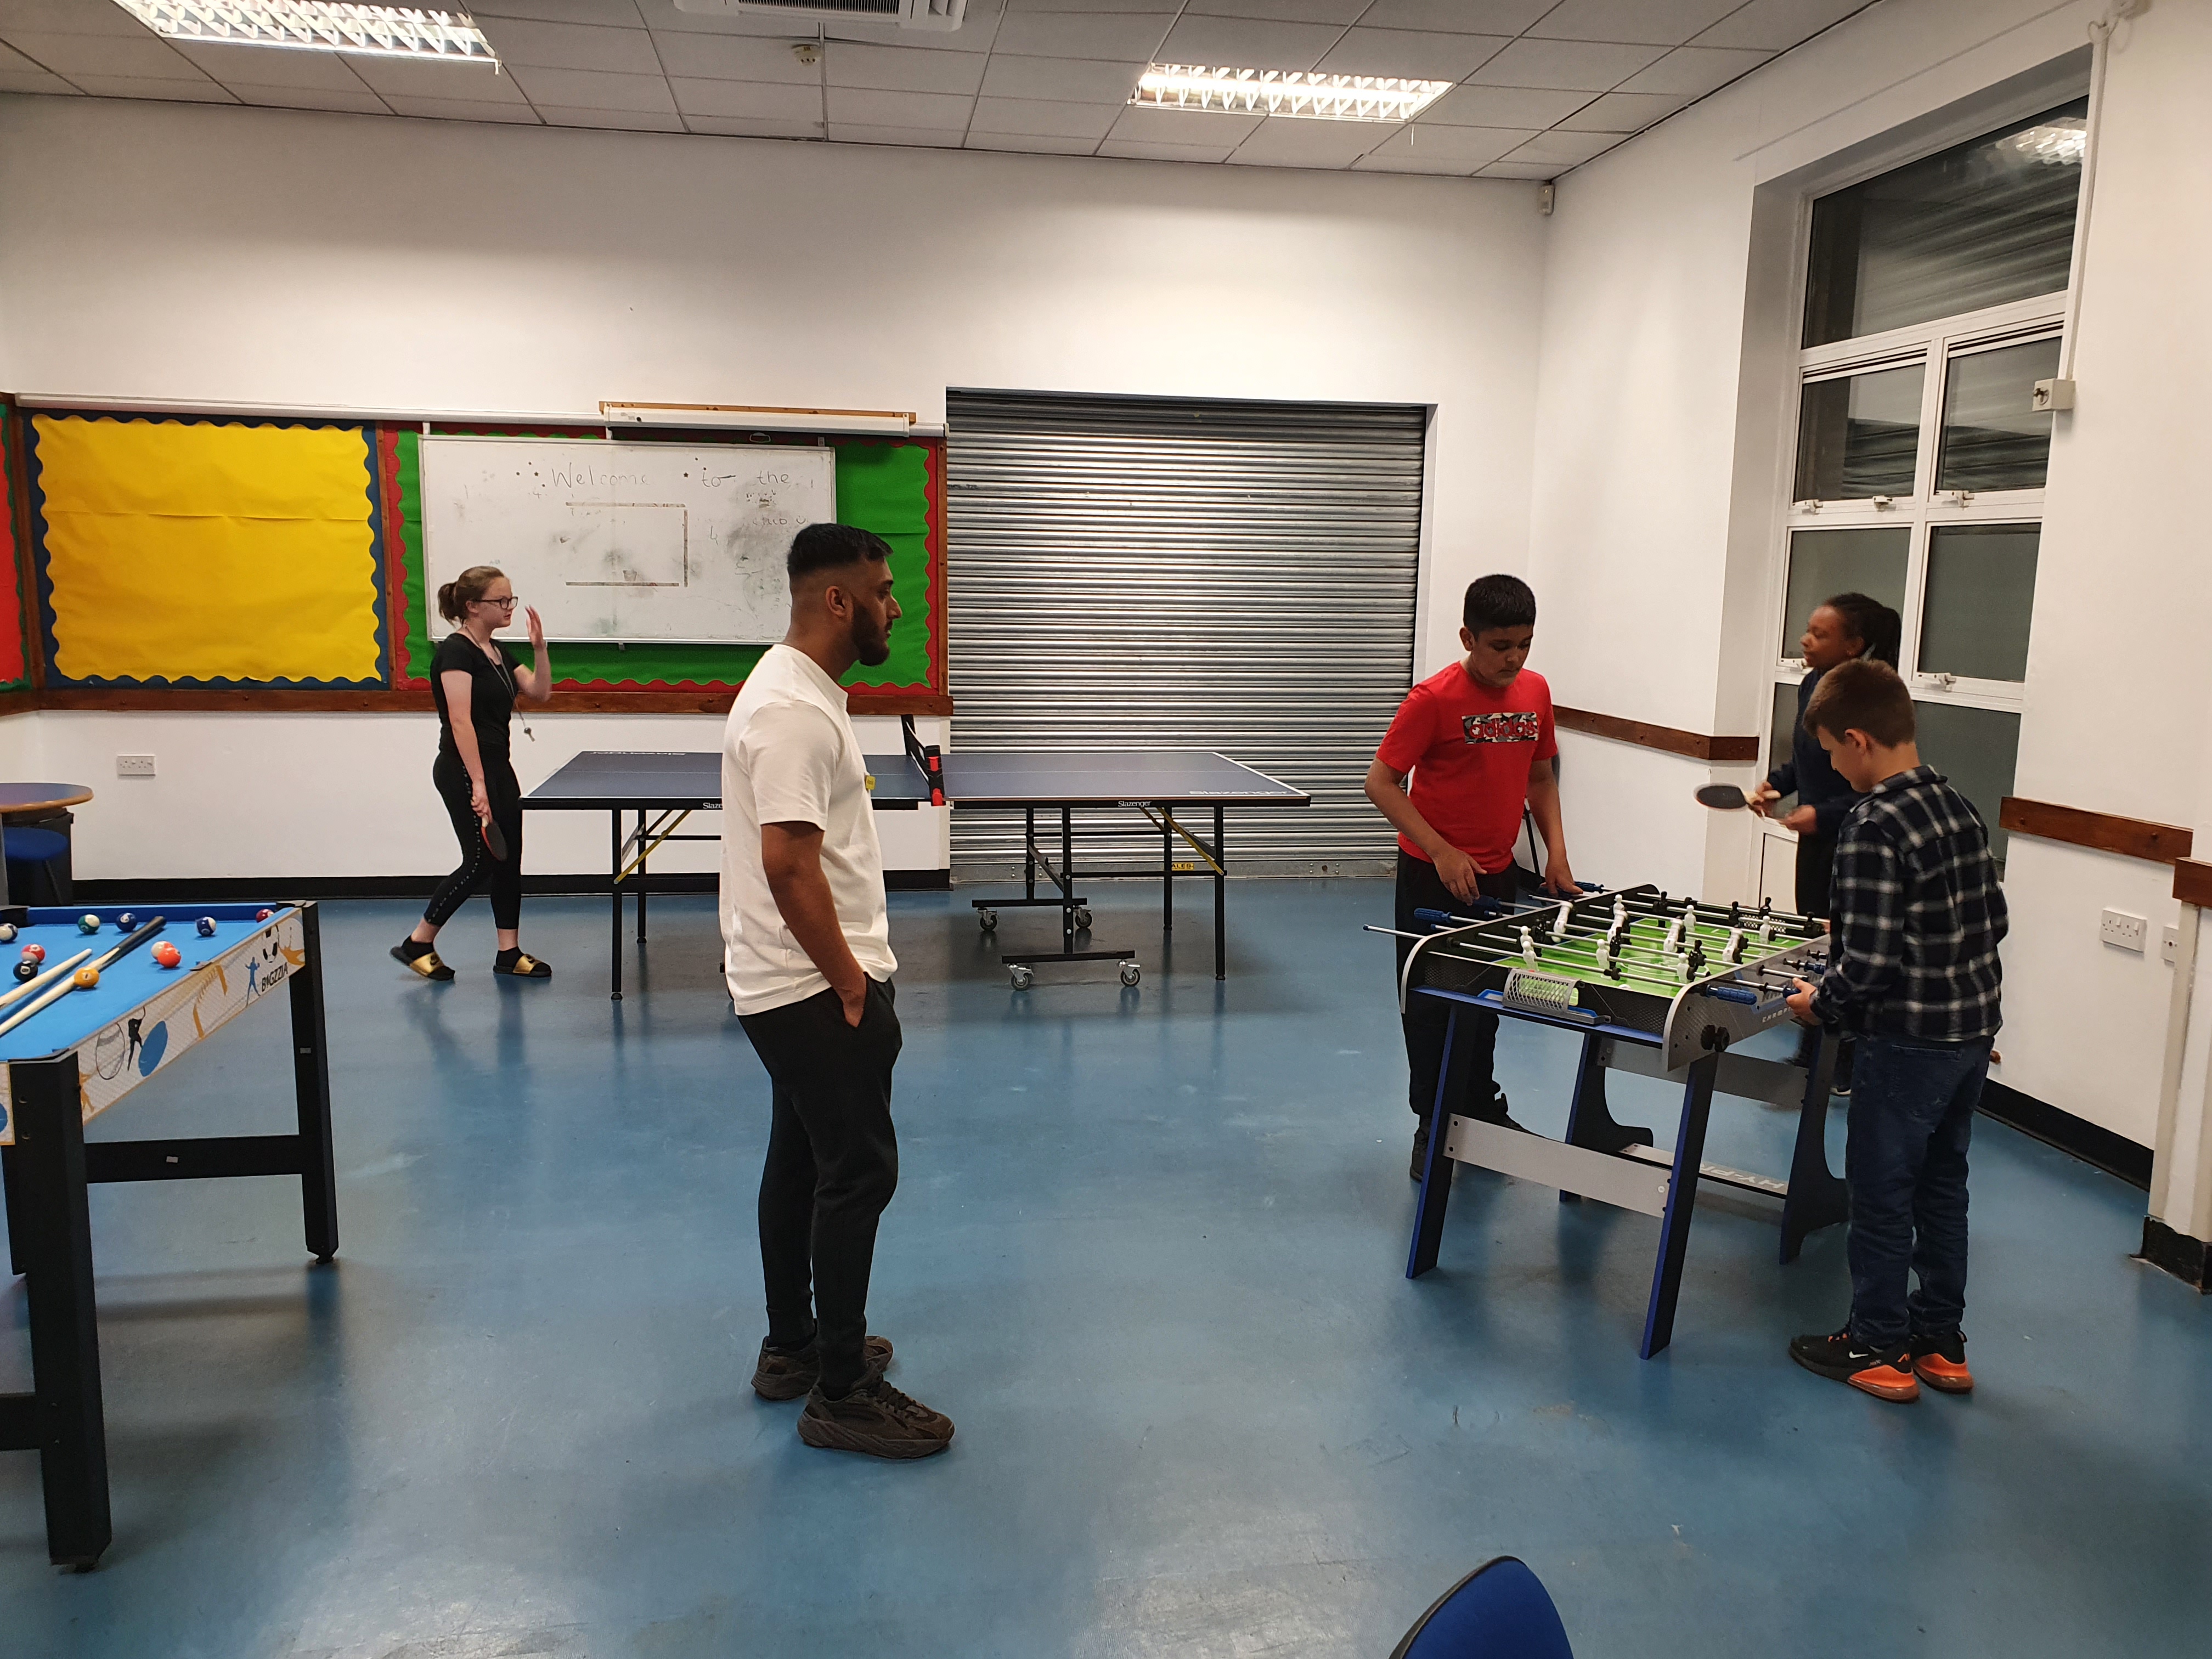 Beckton Community Projects Youth Club